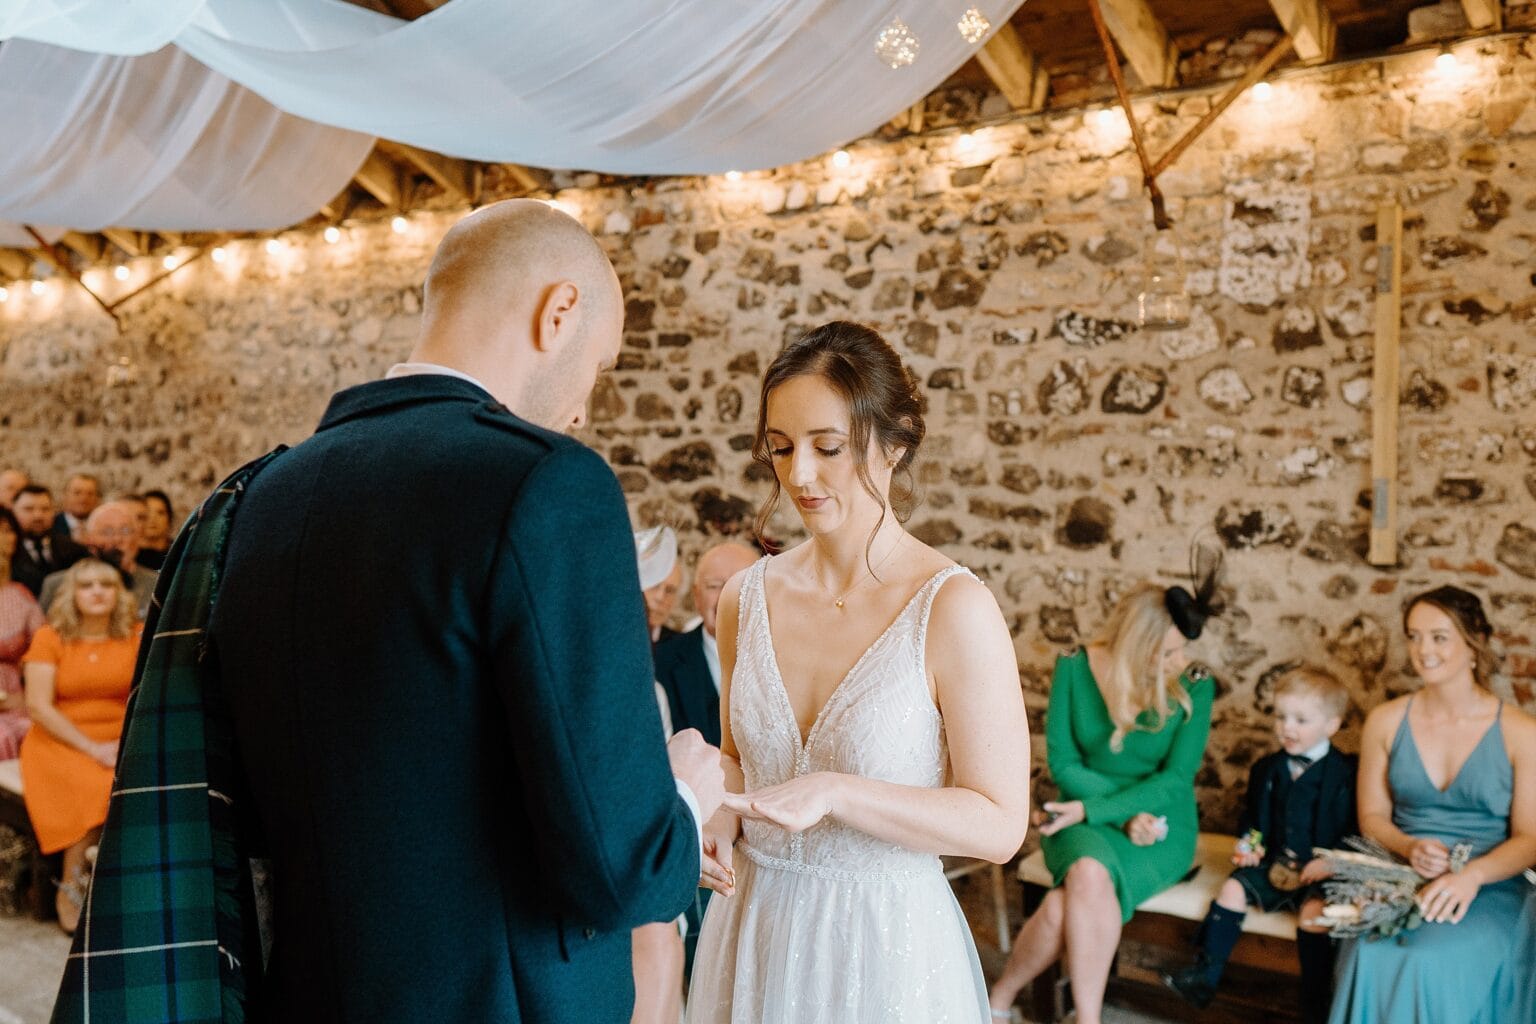 the groom places the wedding ring on the bride's finger during their wedding ceremony in a barn wedding venue near glasgow scotland